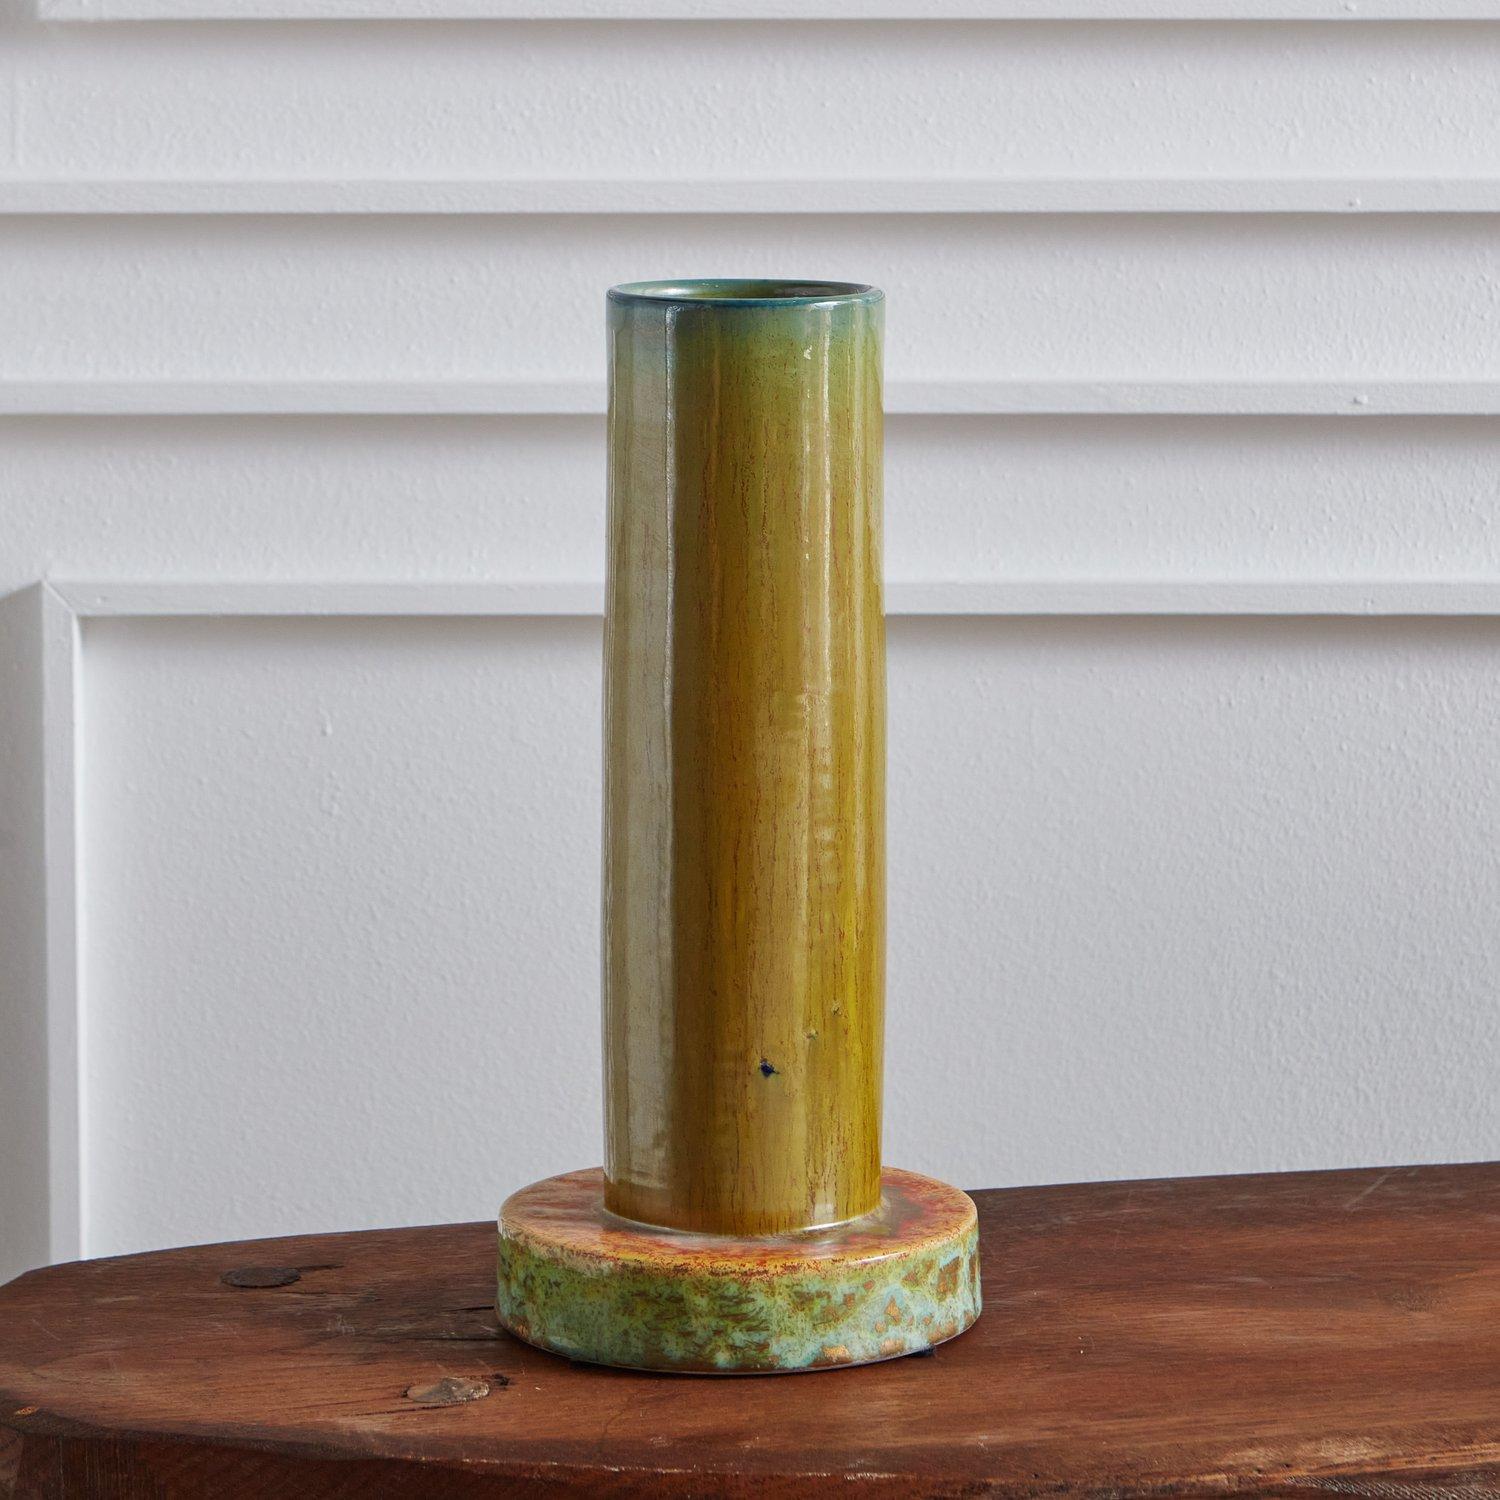 A handmade green glazed ceramic vase sourced in Italy. This vase has a circular base and a tall conical body with beautiful green, blue and orange hues. Signed “CM 2004 Made in Italy.”